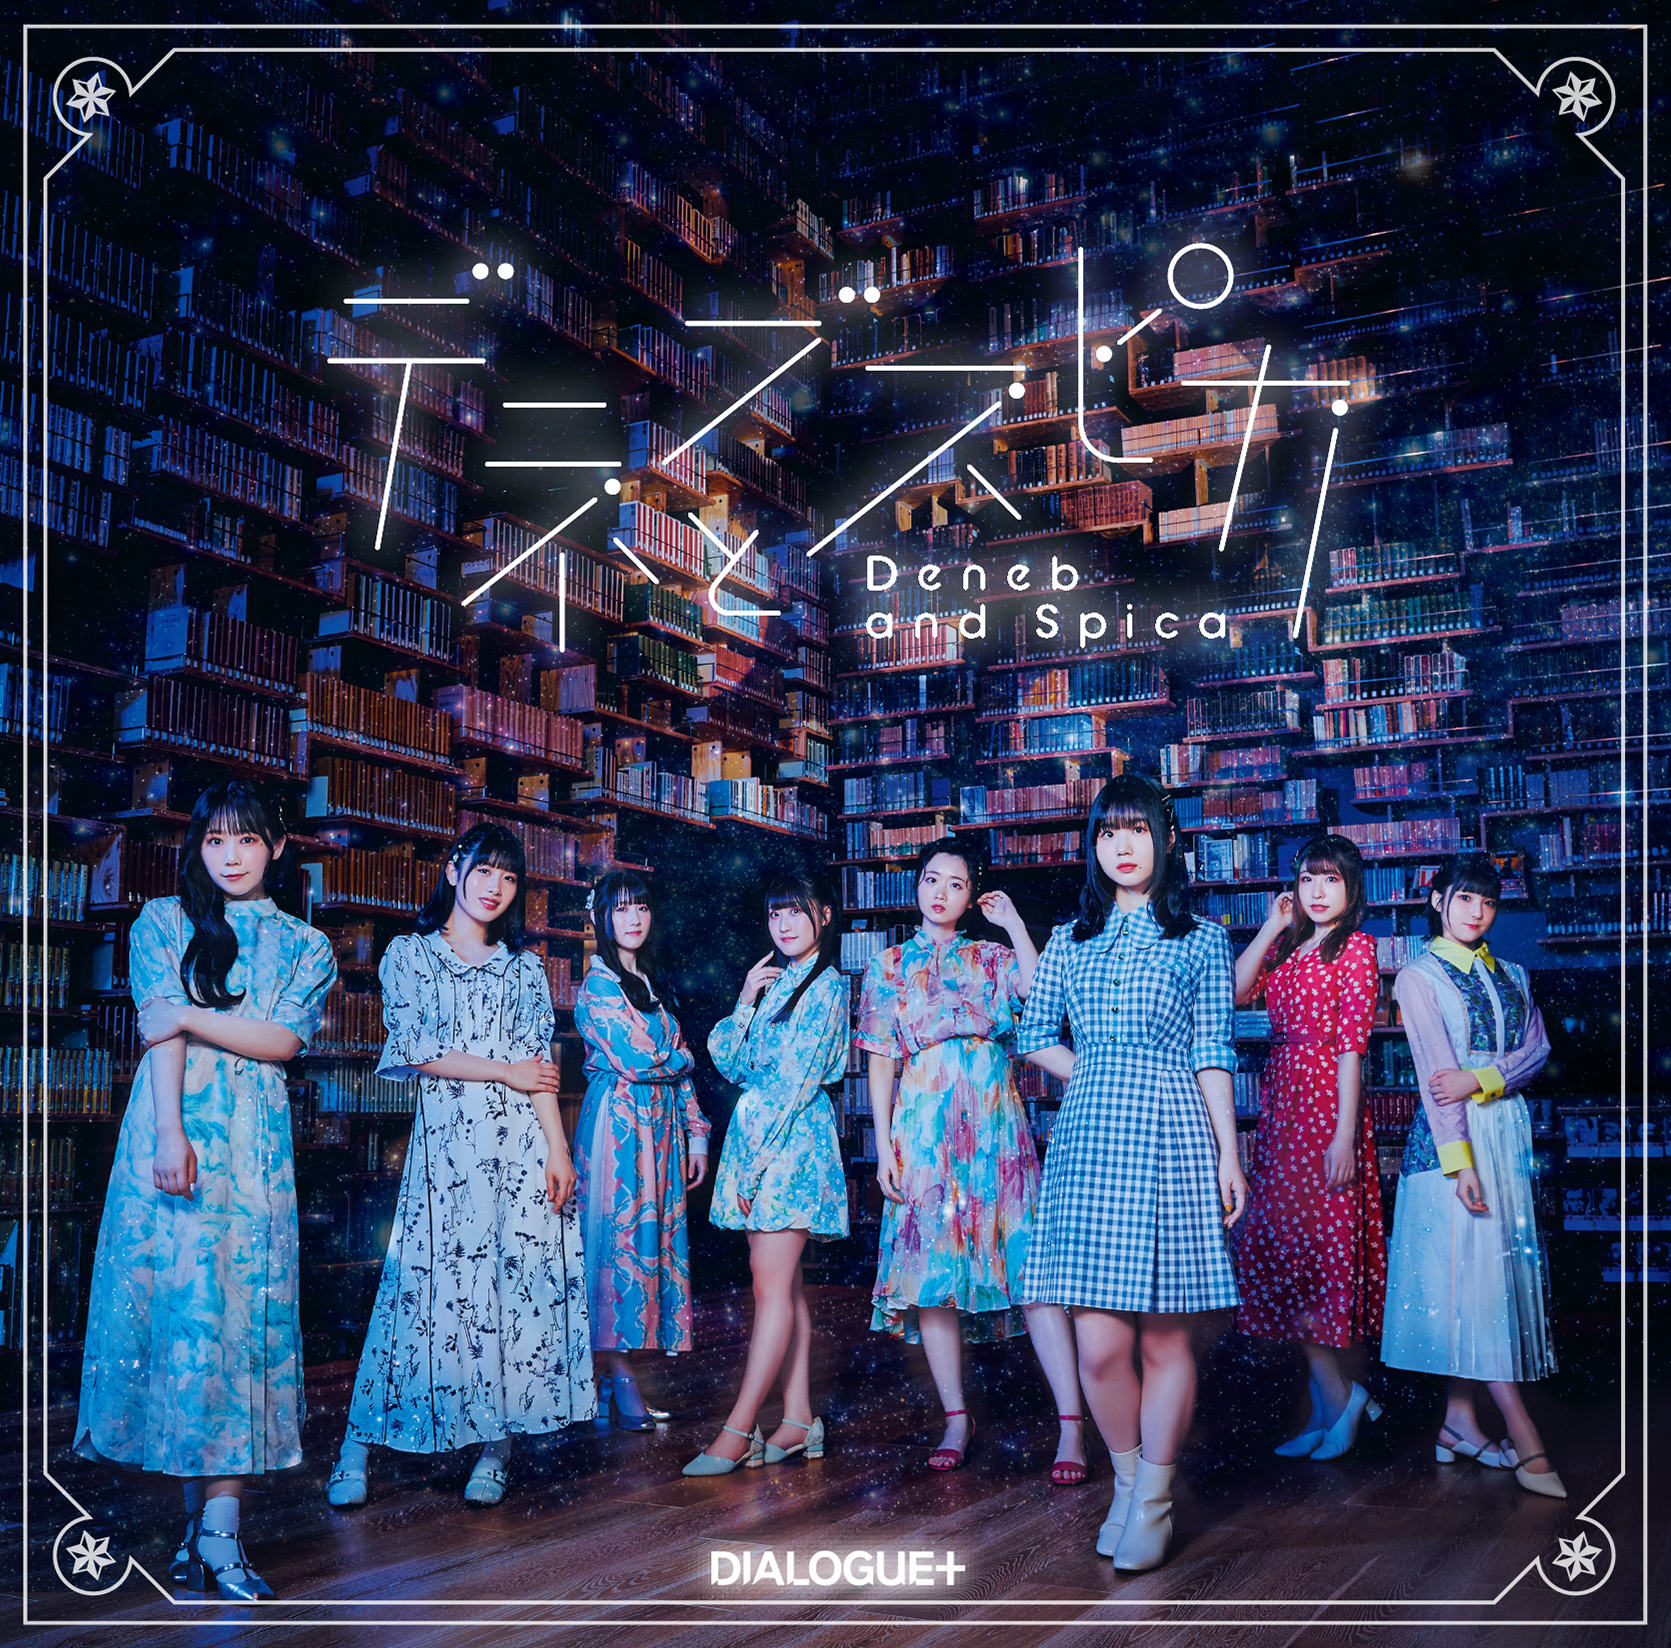 DIALOGUE＋ 7th Single"Deneb to Spica" Normal Edition(CD only)Release on August 24th, 2022